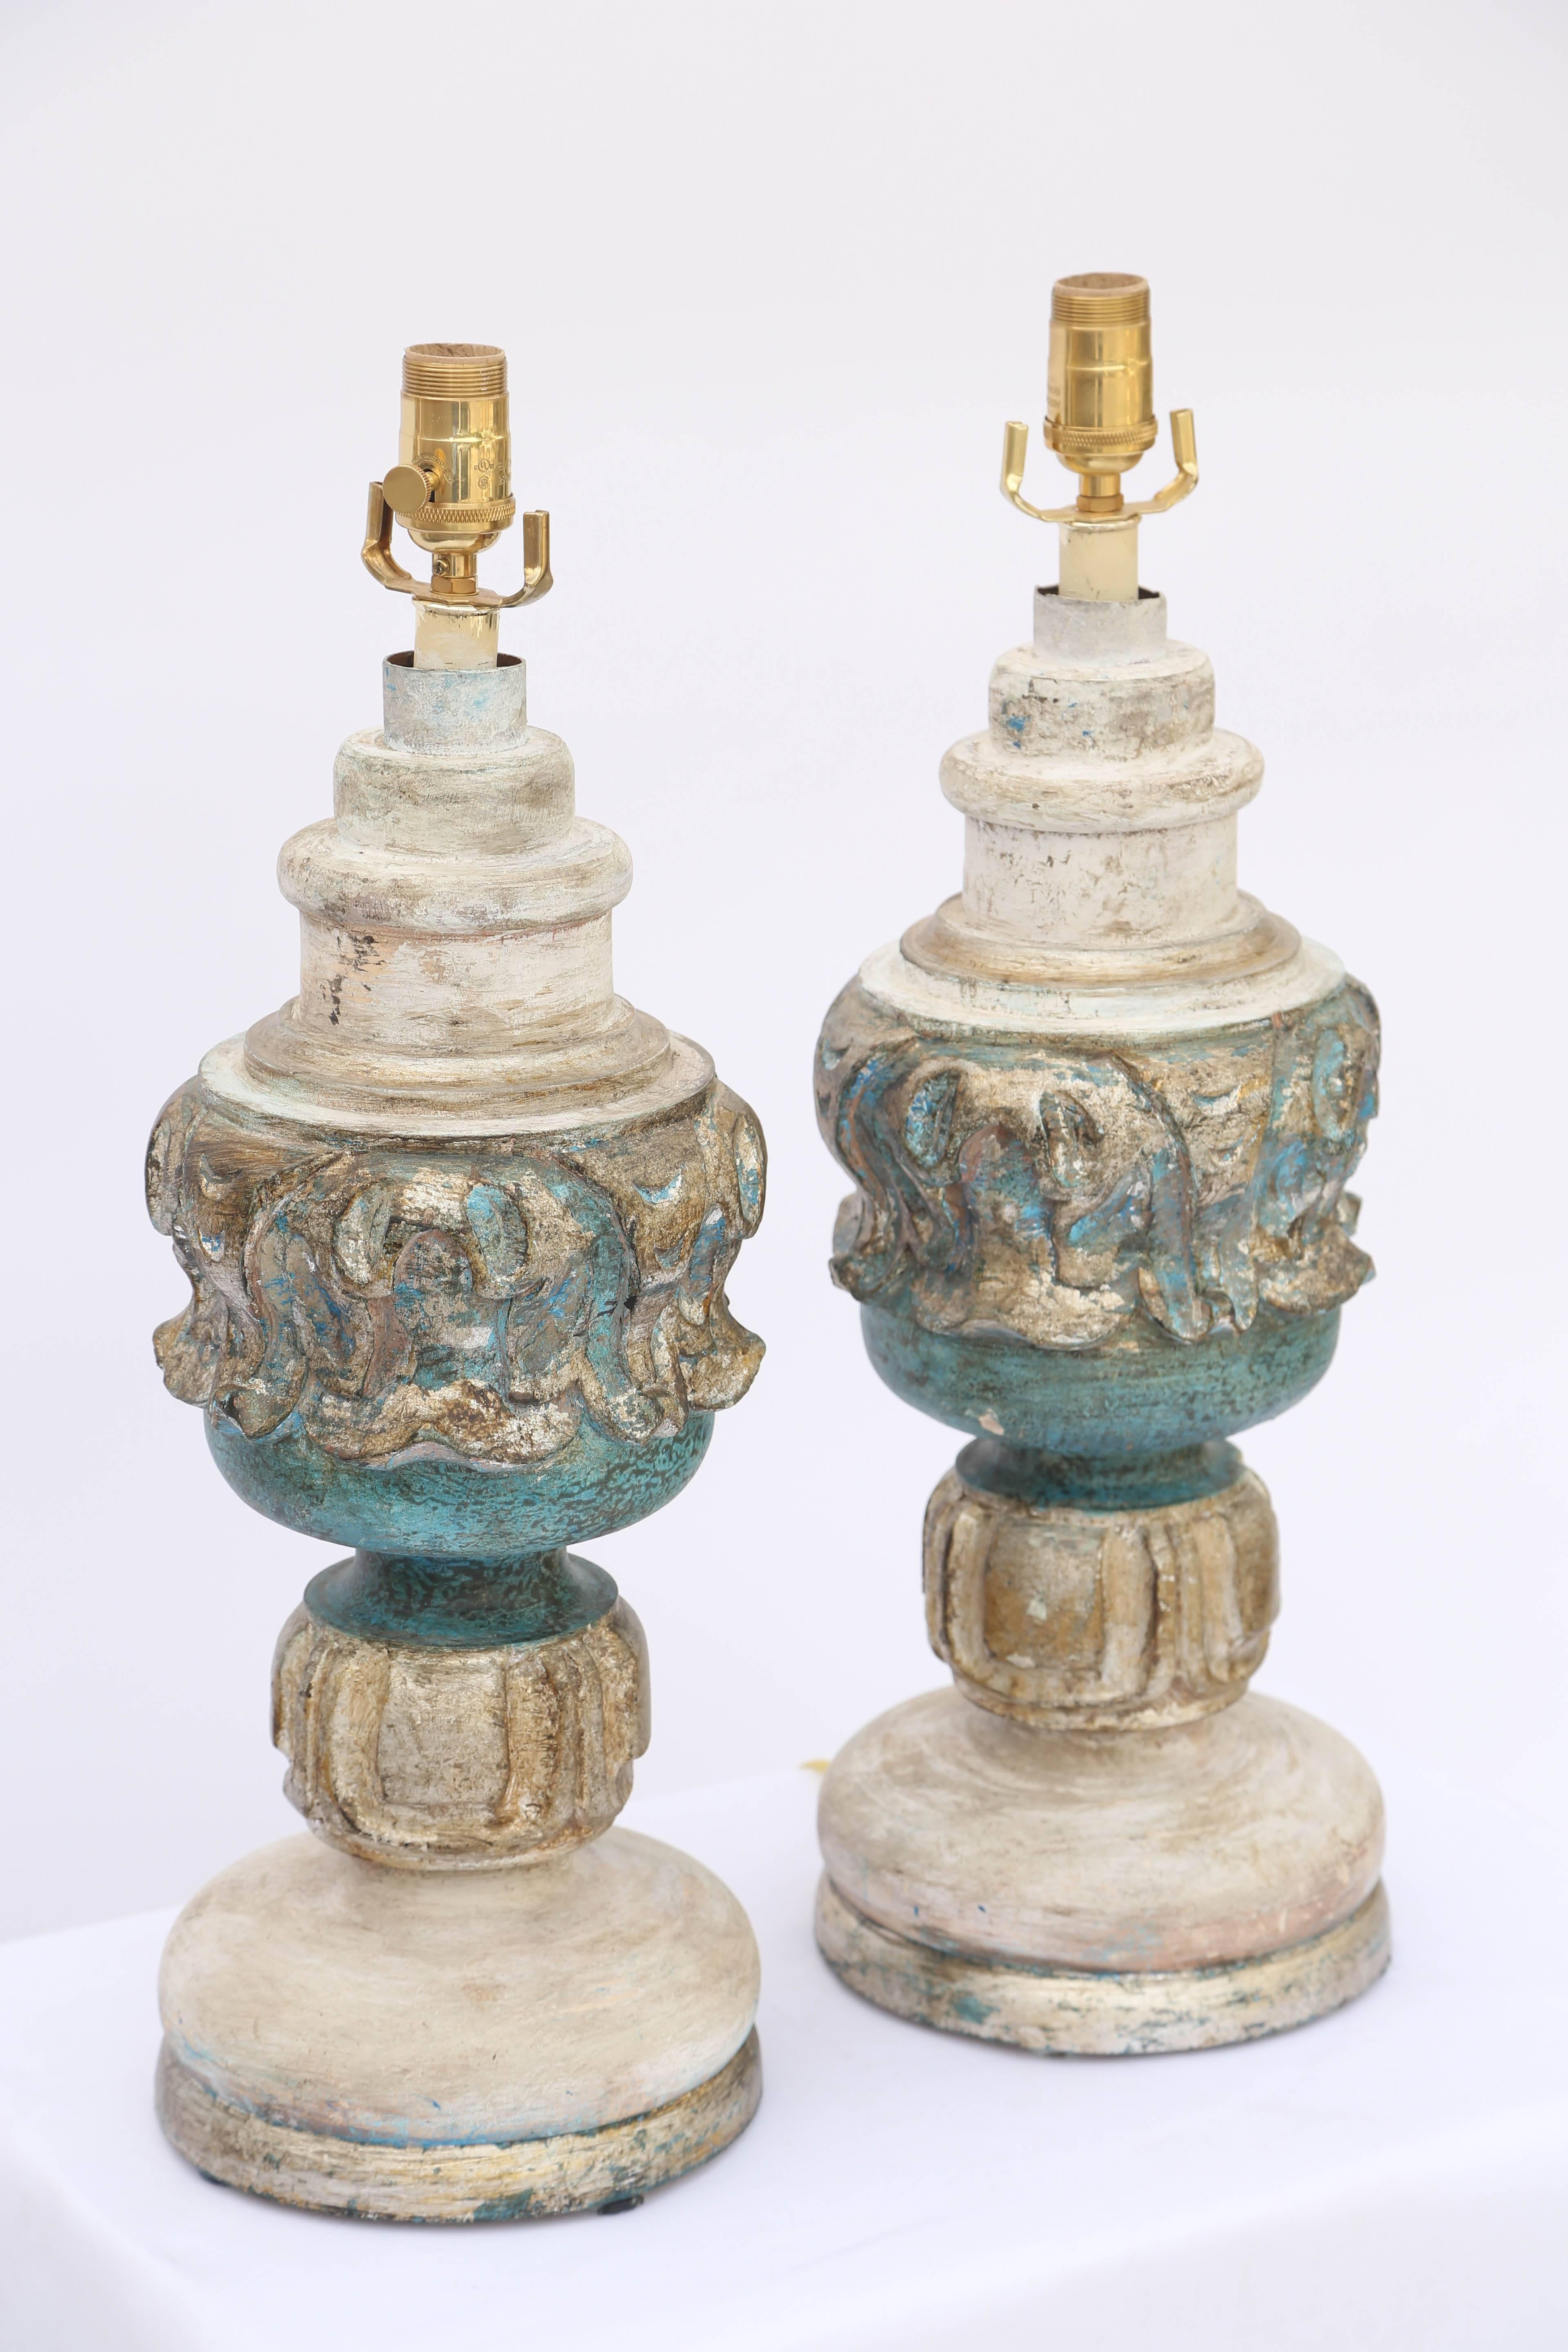 Pair of table lamps, painted and parcel-gilt, each urn-form body decorated with classical out-carving, raised on tiered round foot.

Stock ID: D6459